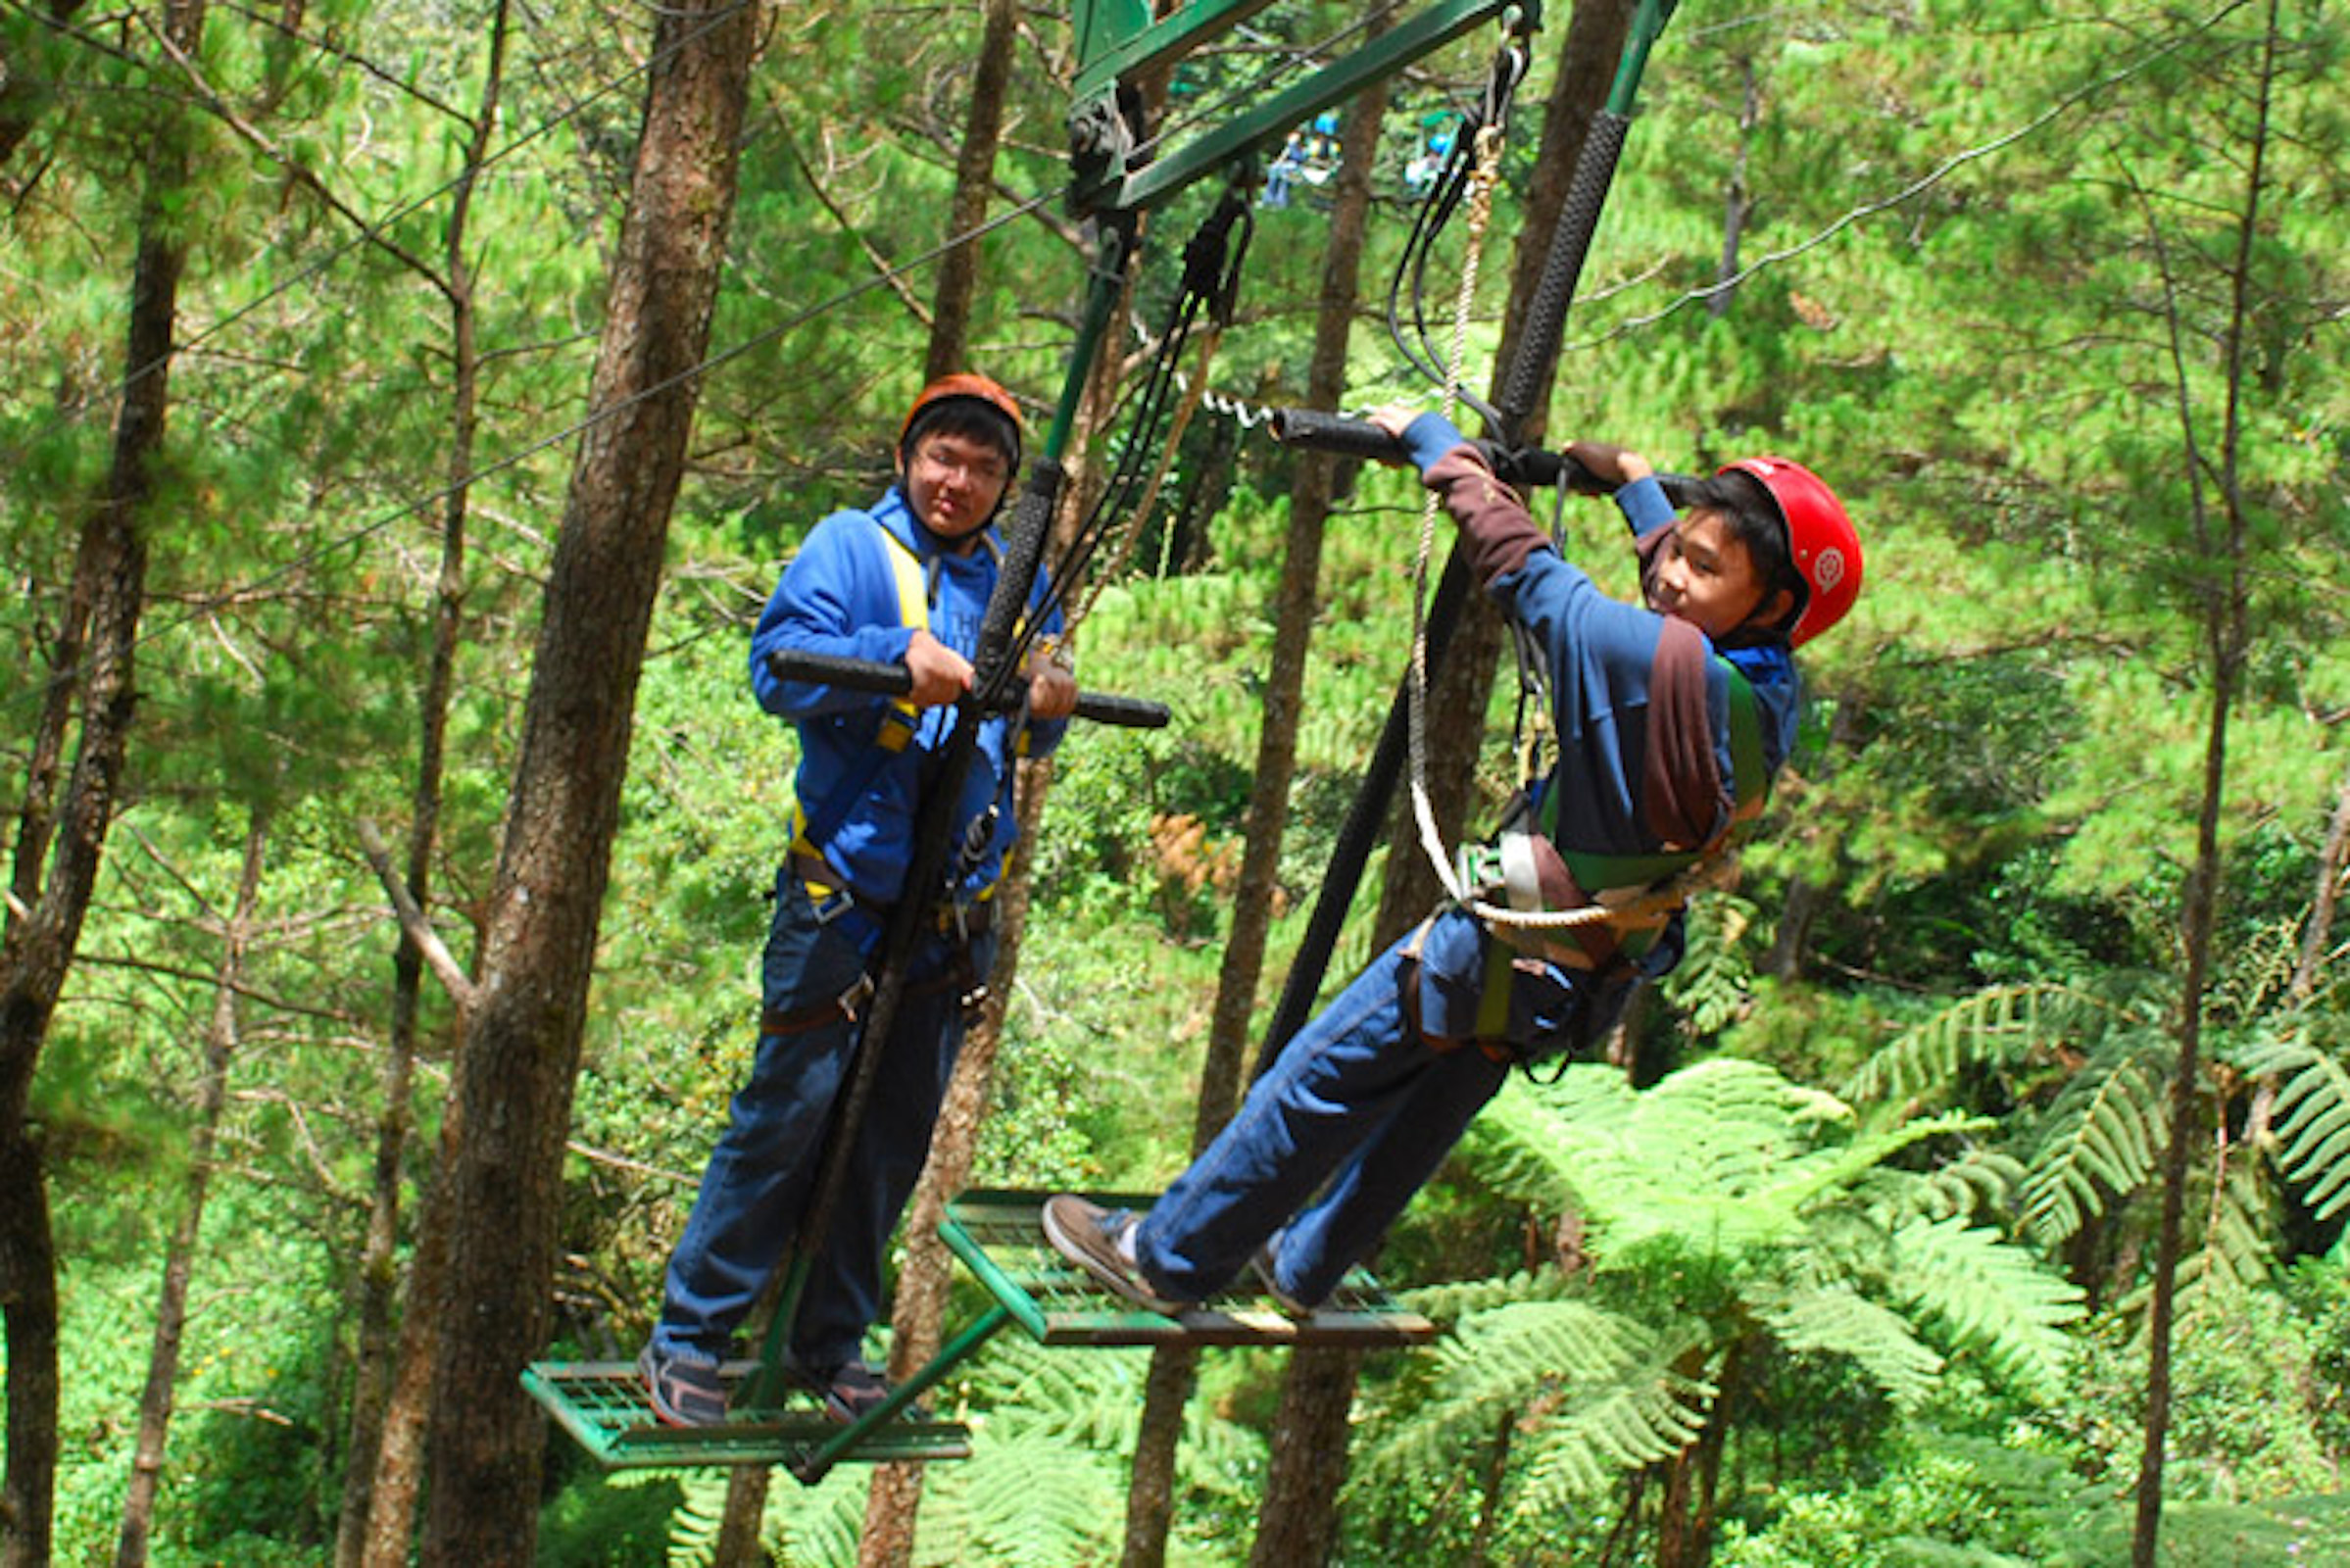 Baguio Tree Top Adventure Silver Surfer Ride | Guide to t...